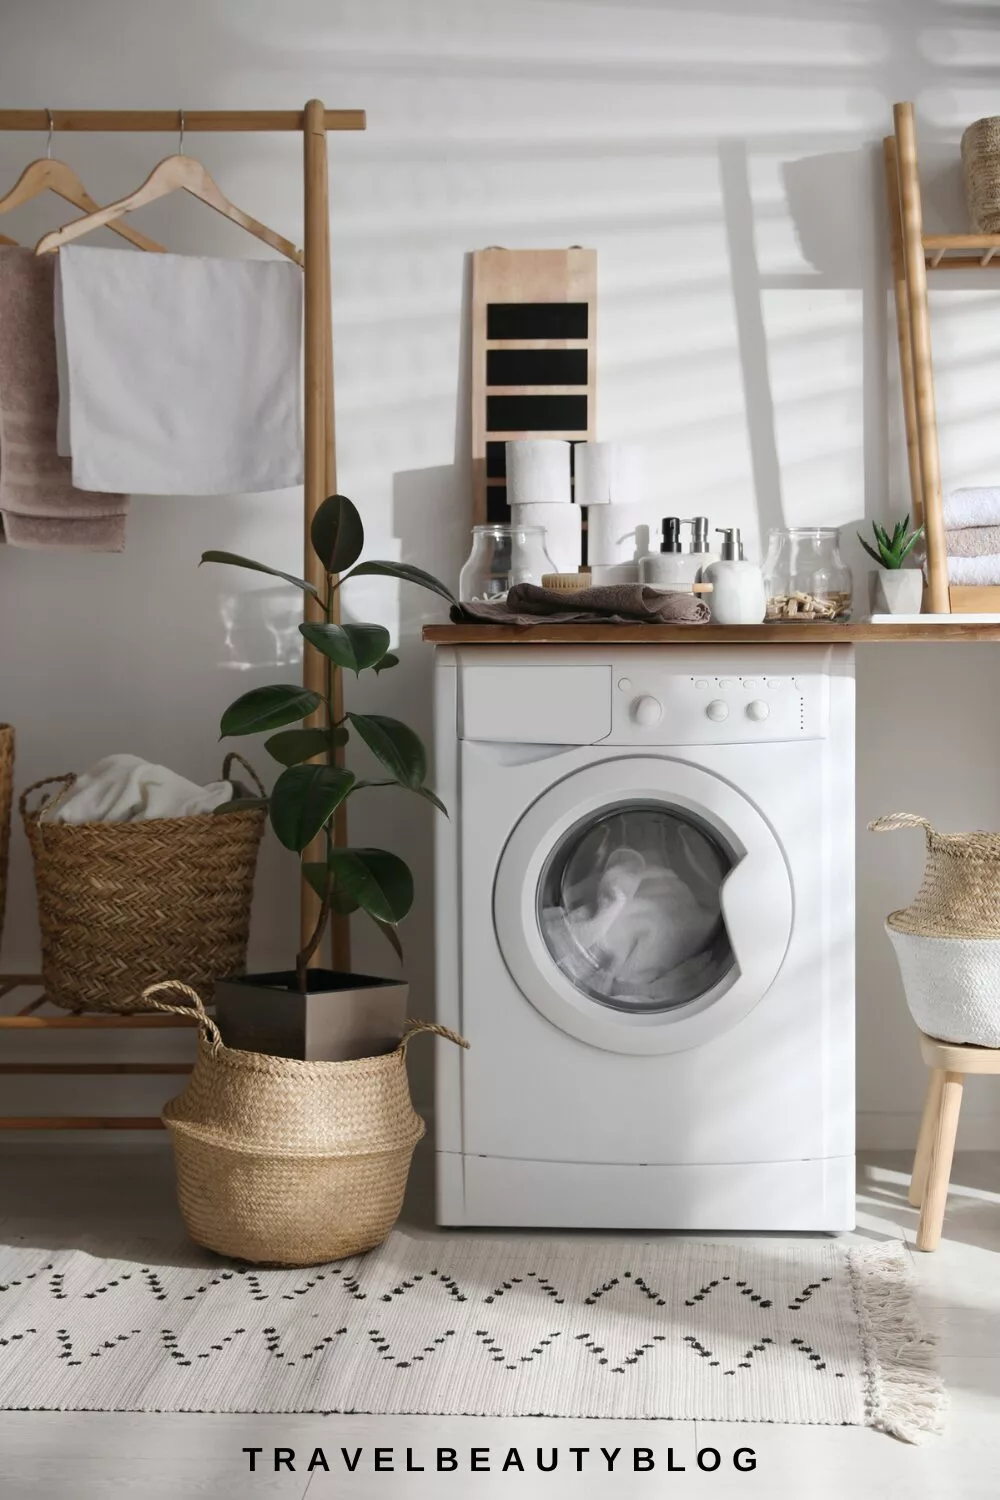 21 Amazing Laundry Room Ideas For Small Spaces